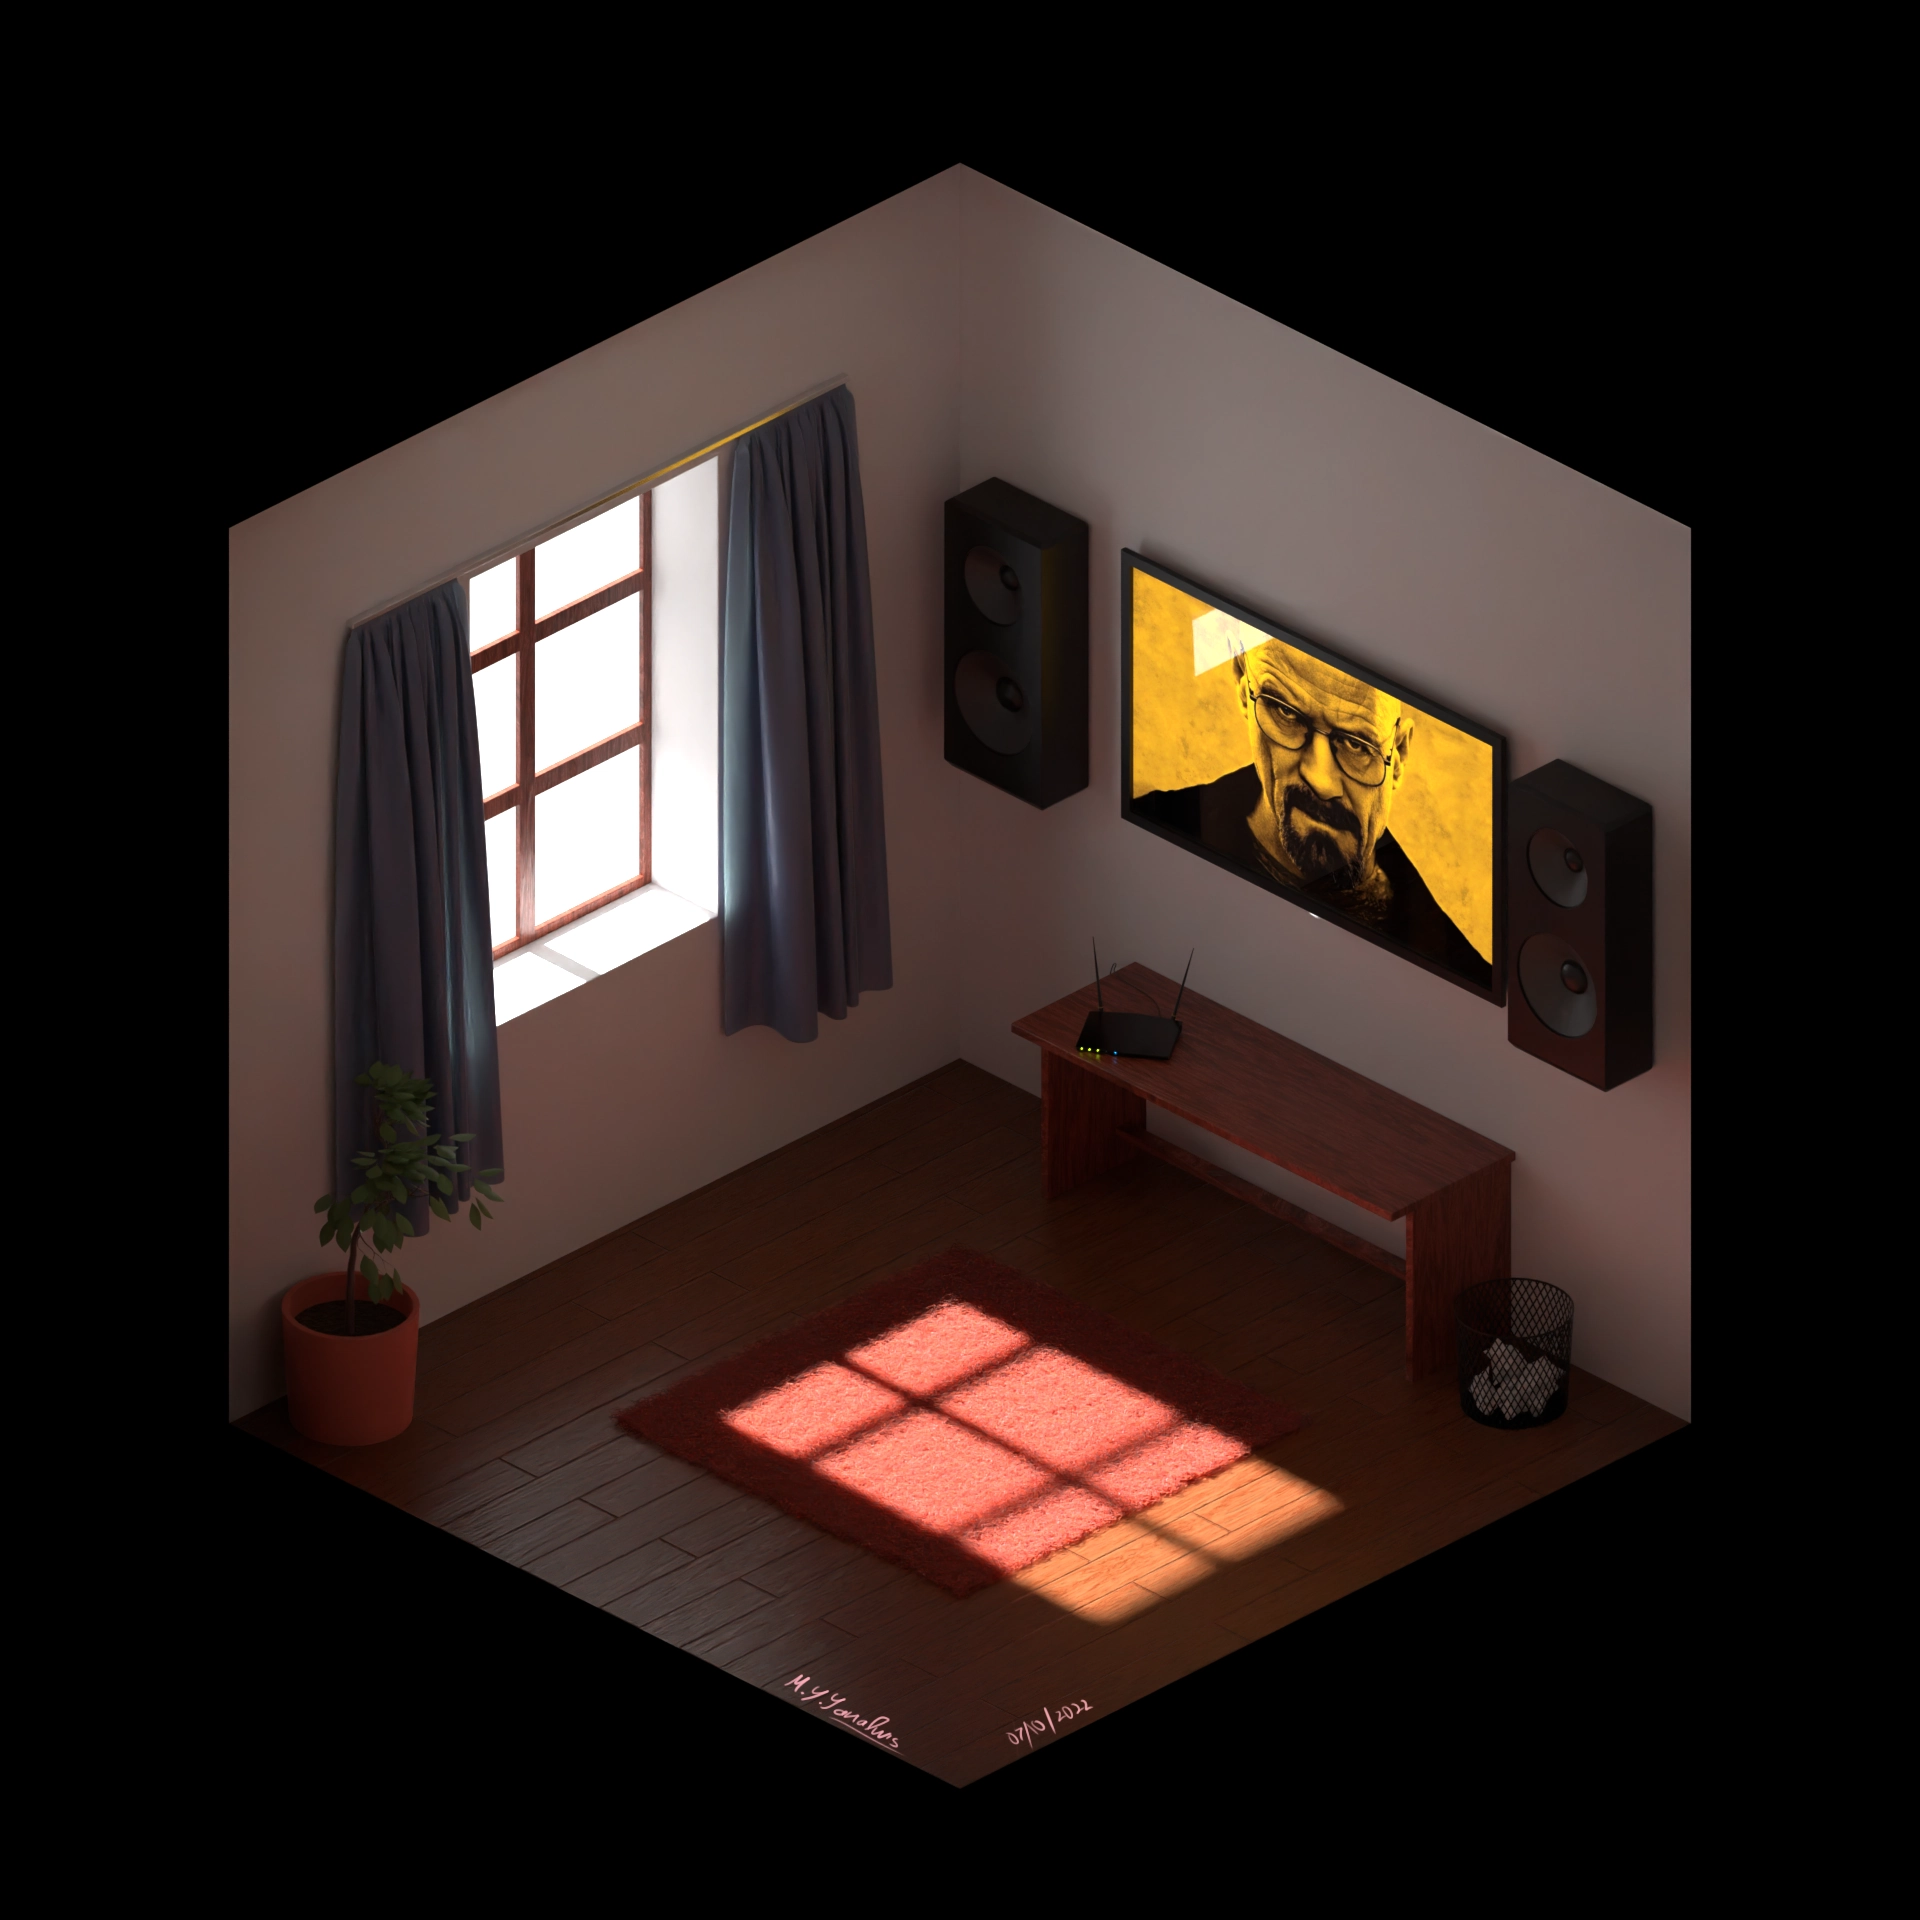 Isometric Scene Inspired by my friend's drawing